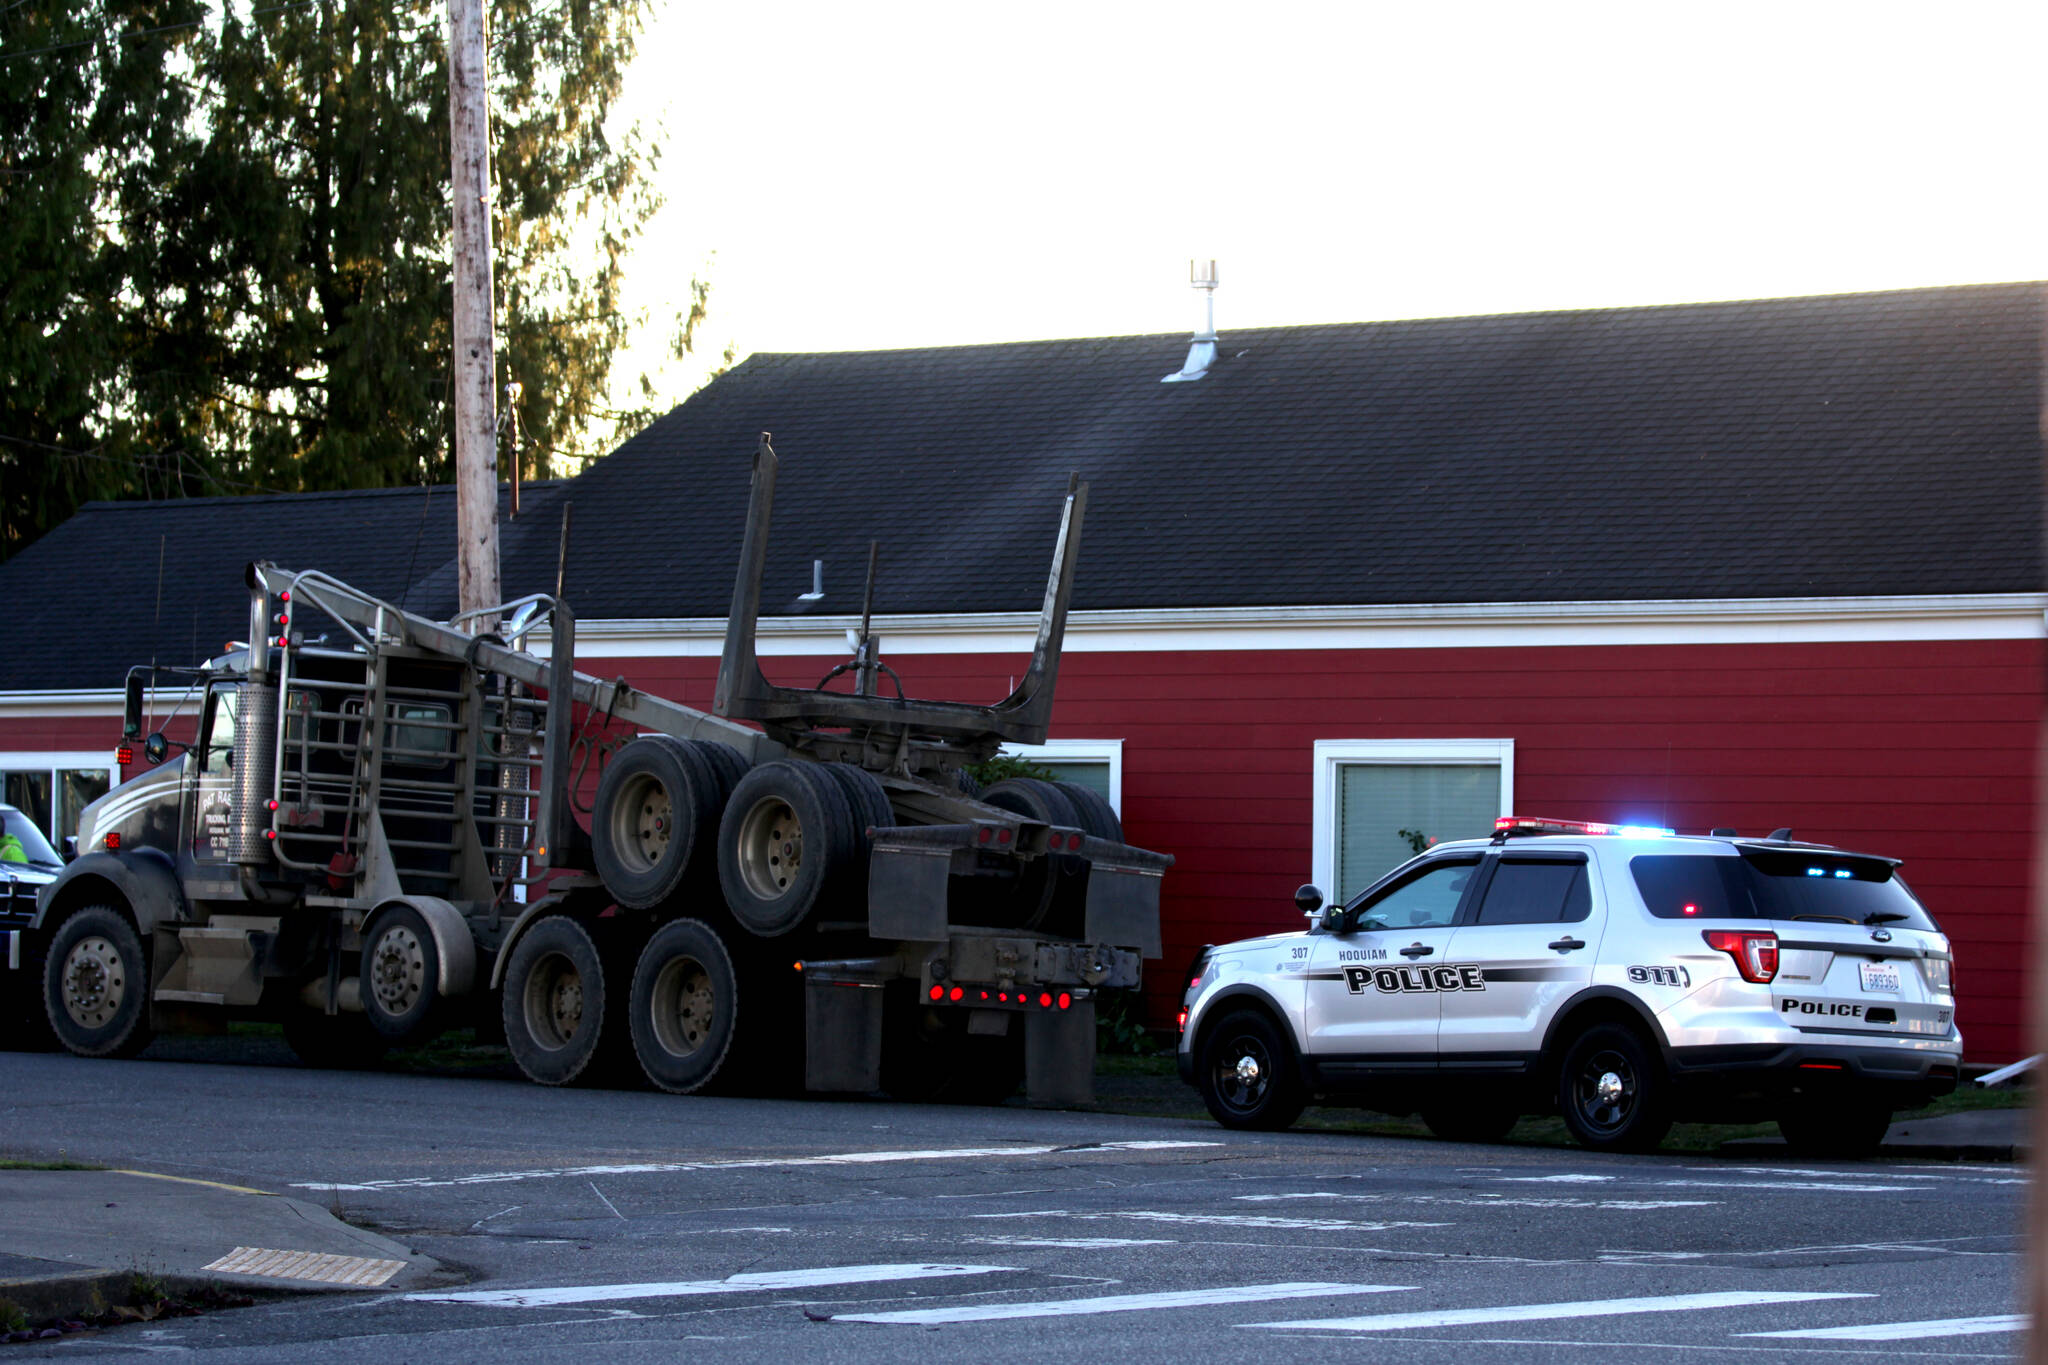 A log truck struck two students in a crosswalk in Hoquiam on Nov. 8, noncritically injuring them. (Michael S. Lockett / The Daily World)